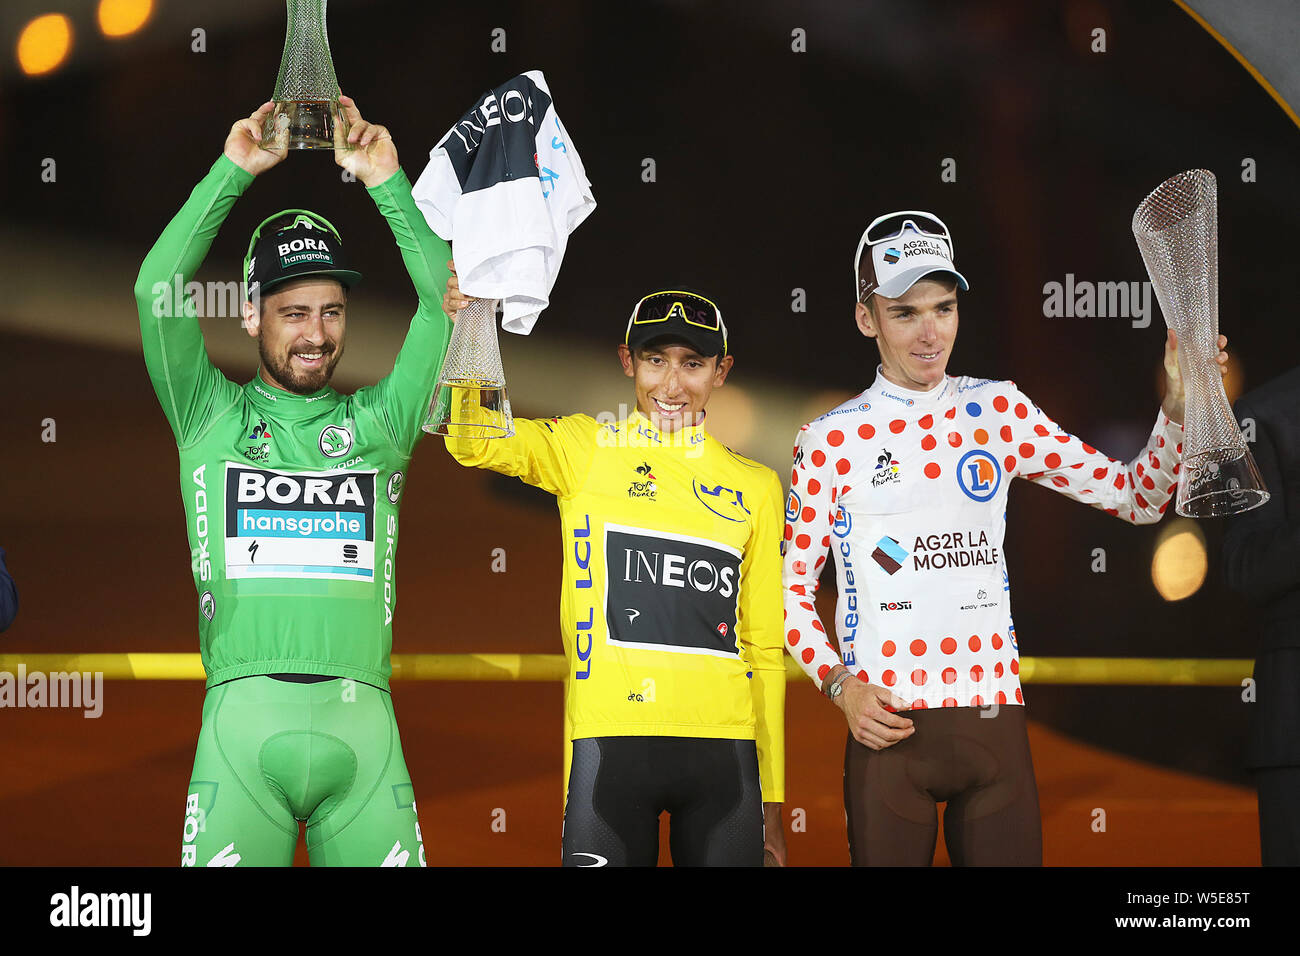 Pari, France. 28th July, 2019. Paris - 27-07-2019, cycling, Stage 21,  etappe 21, Rambouillet - Paris, champs-elysees, Winner of the yellow jersey  Egan Bernal, the green jersey Peter Sagan and the polka